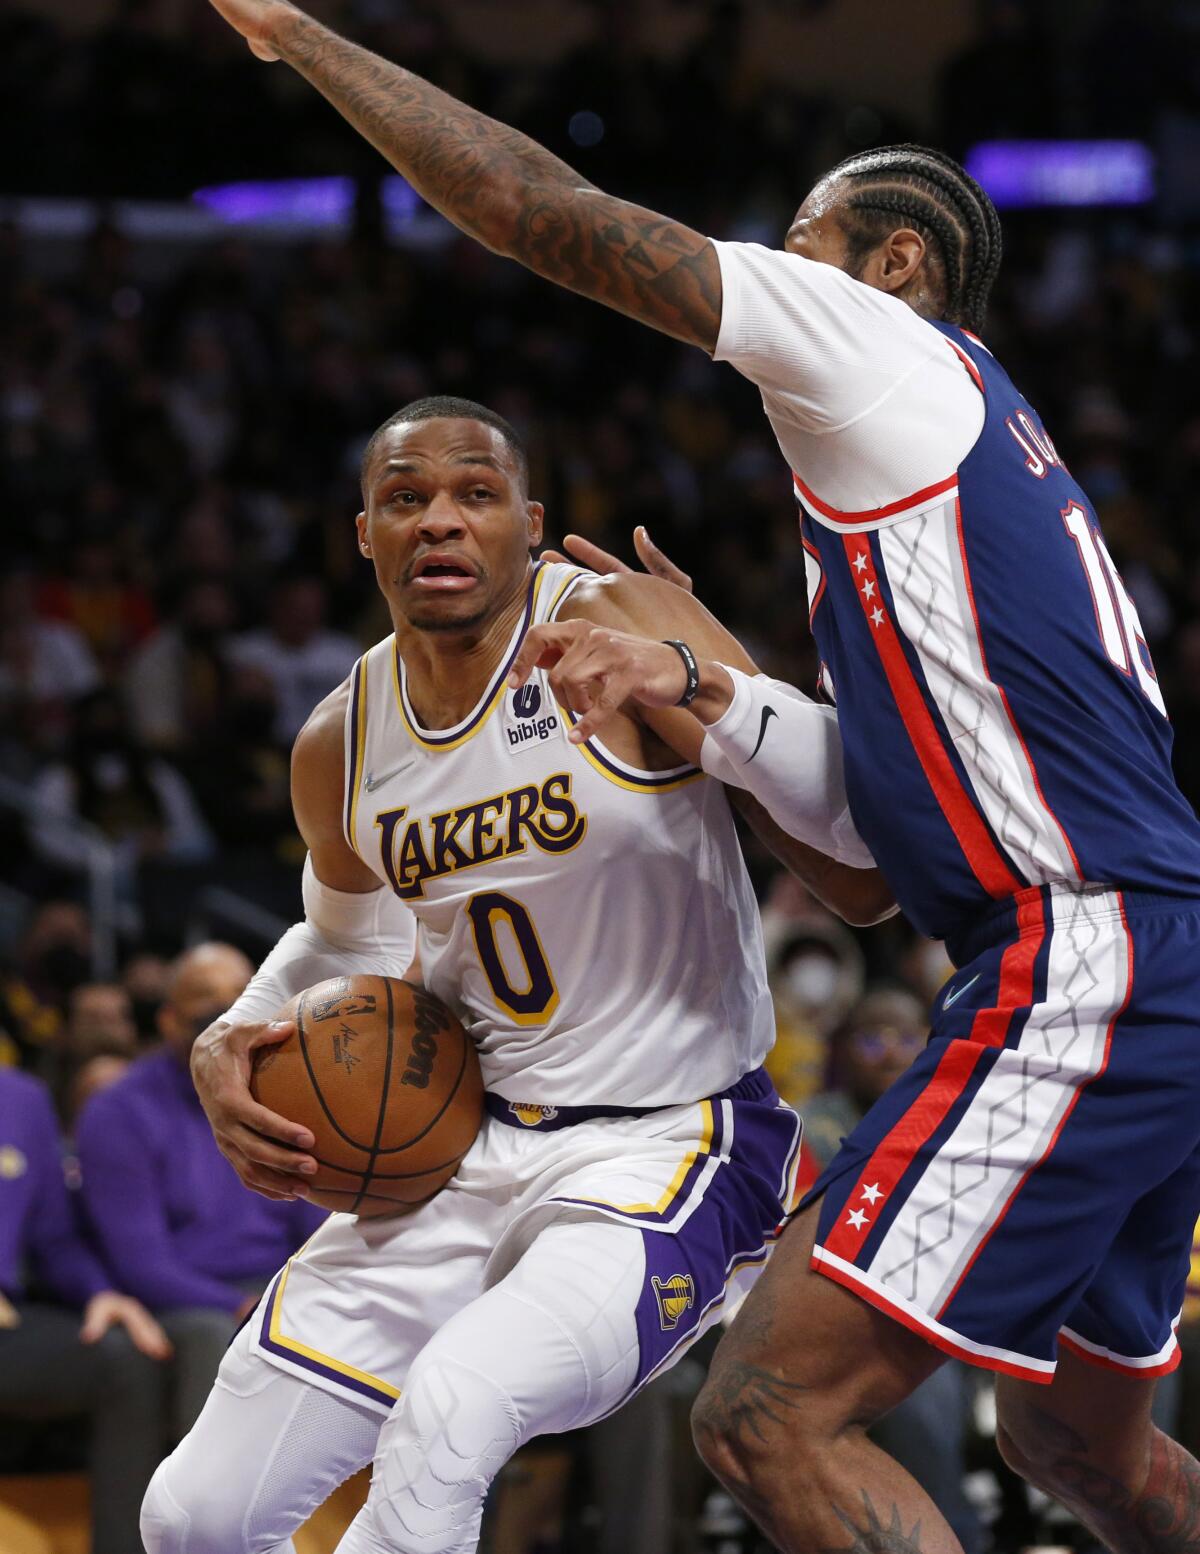 Lakers guard Russell Westbrook guarded by Brooklyn Nets forward James Johnson.